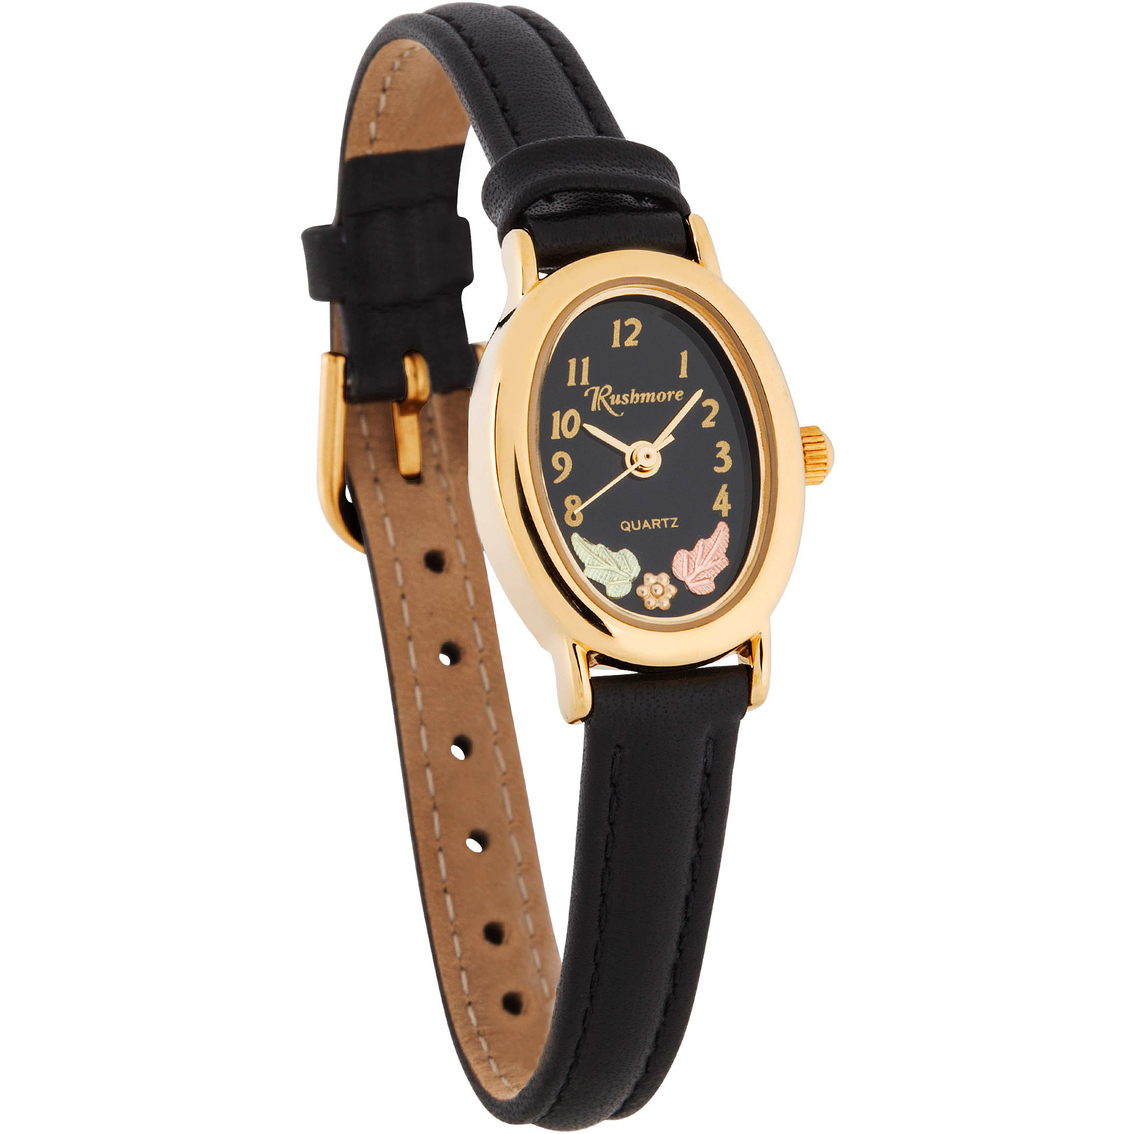 Black Hills Gold Women's L Rushmore Watch Wr38414 | Leather Band ...